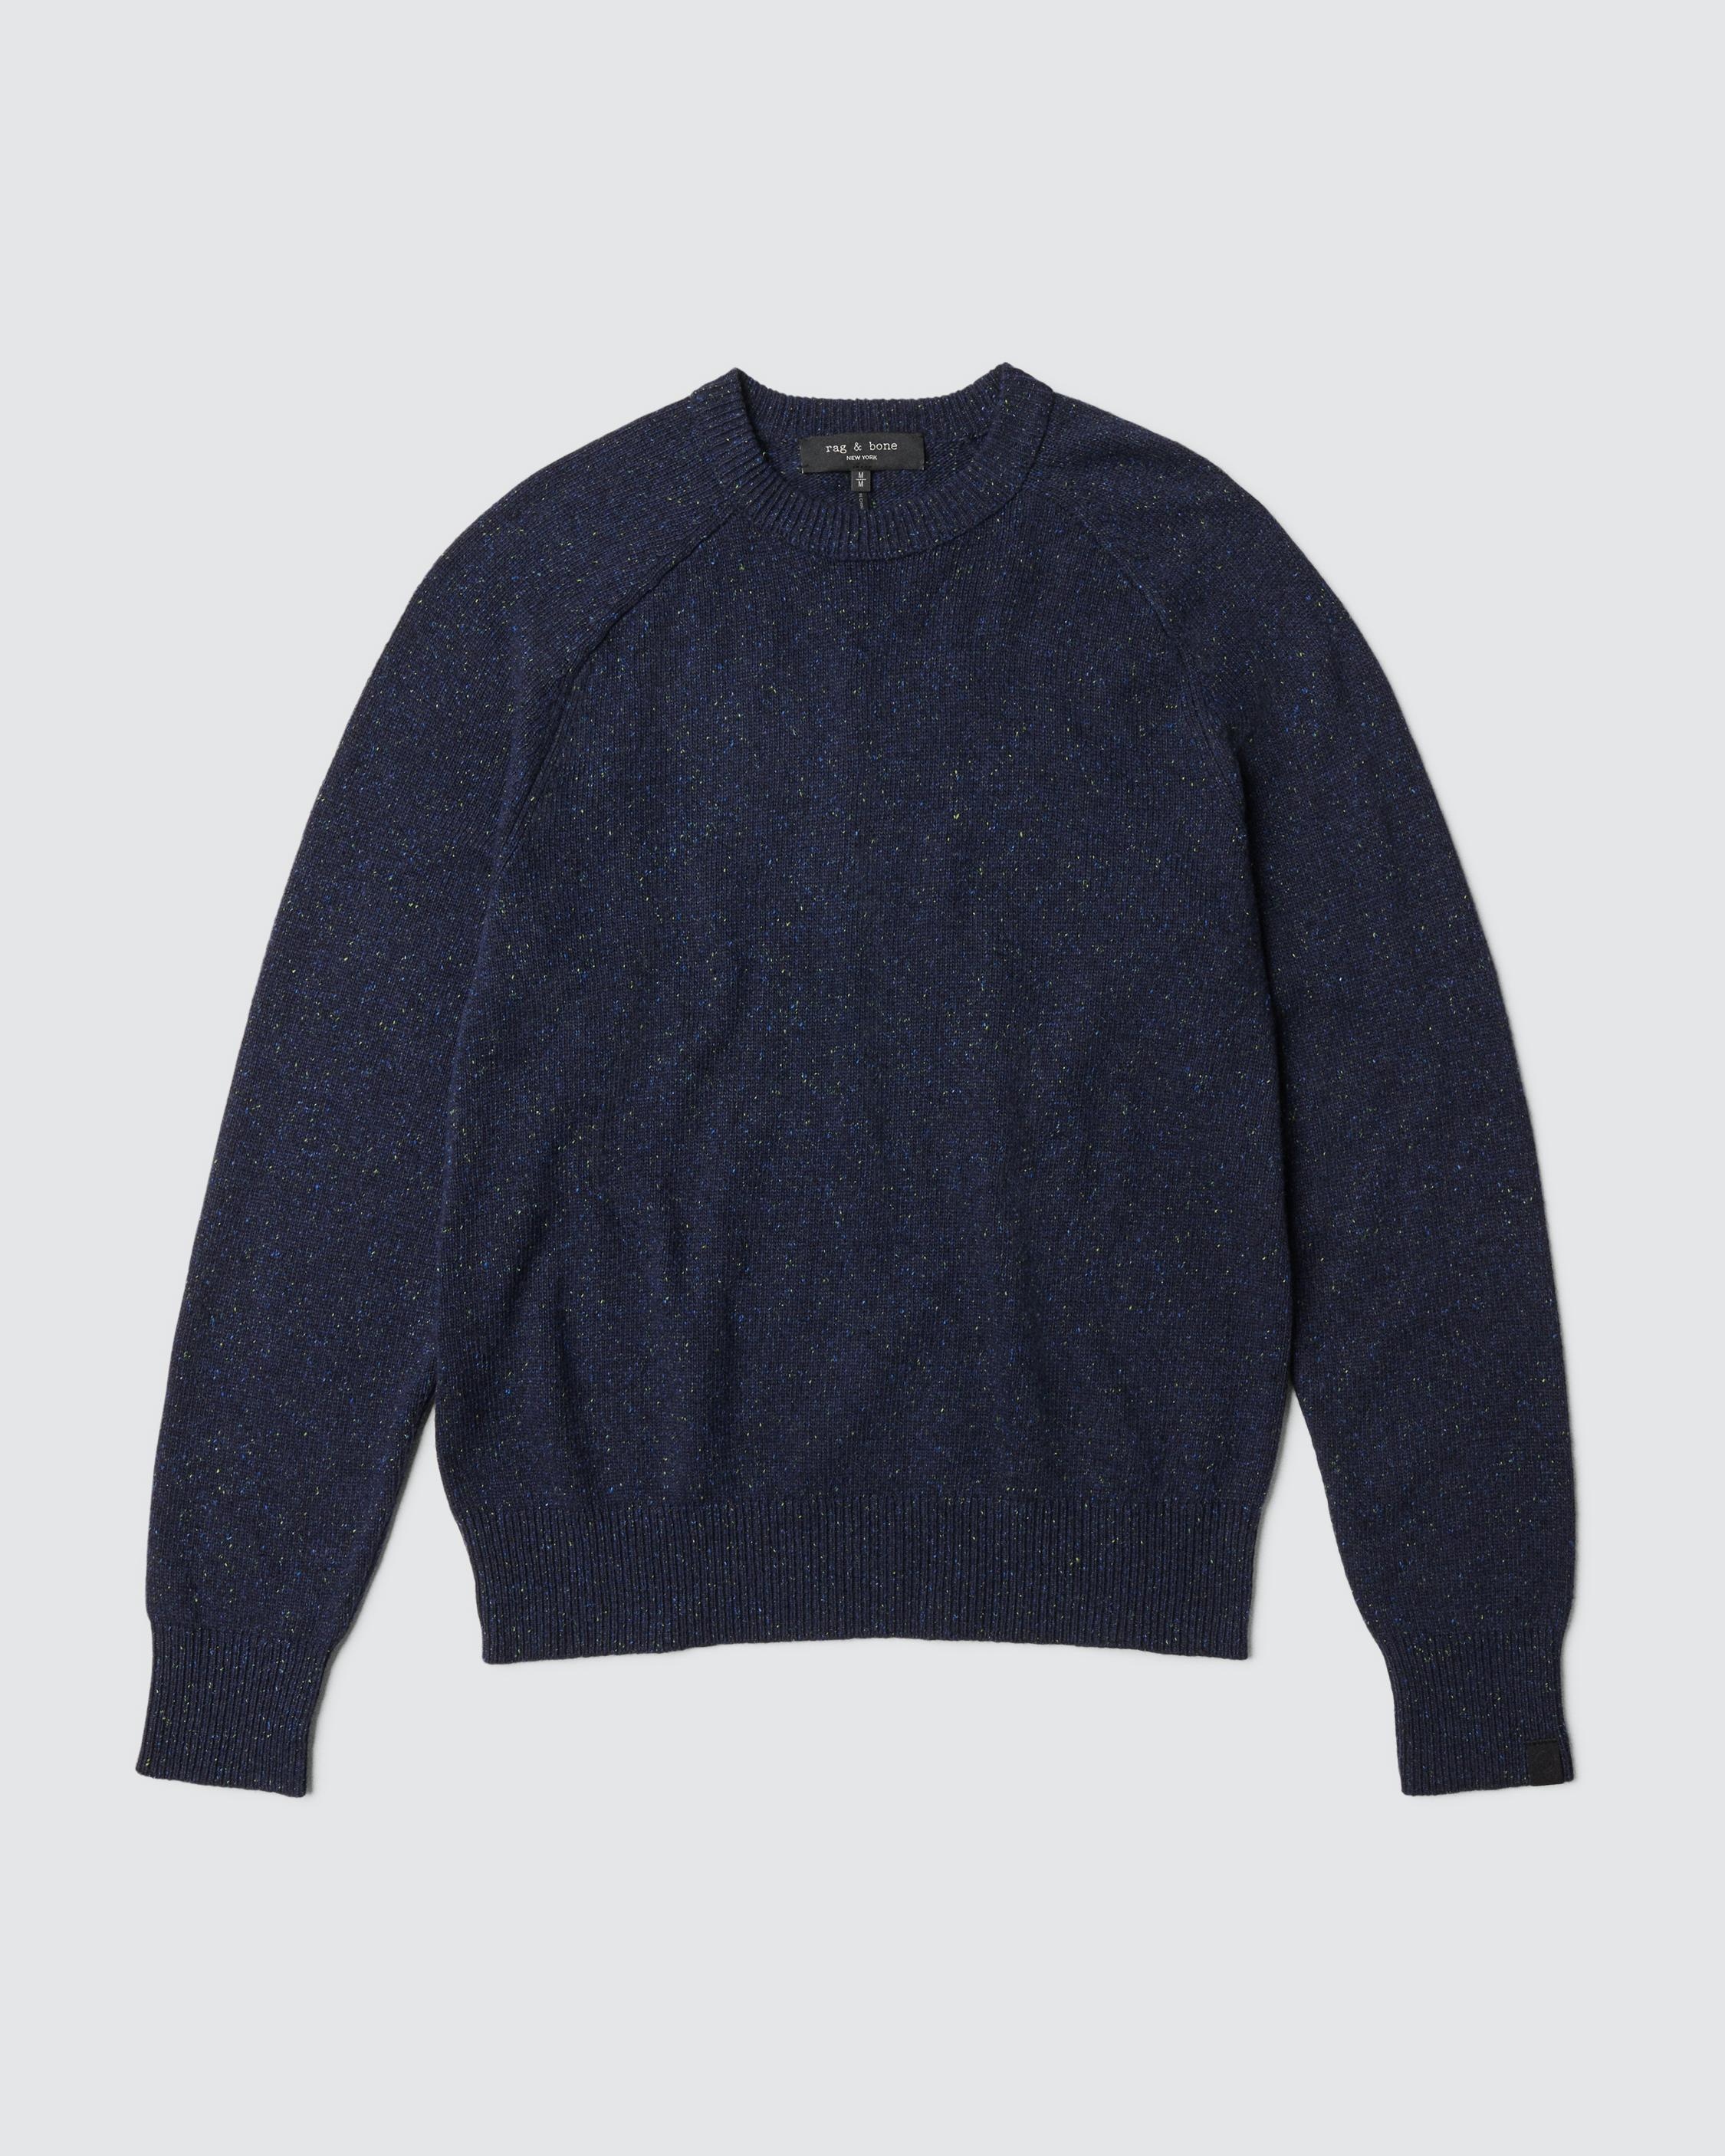 Donegal Harlow Wool Crew
Classic Fit - 1